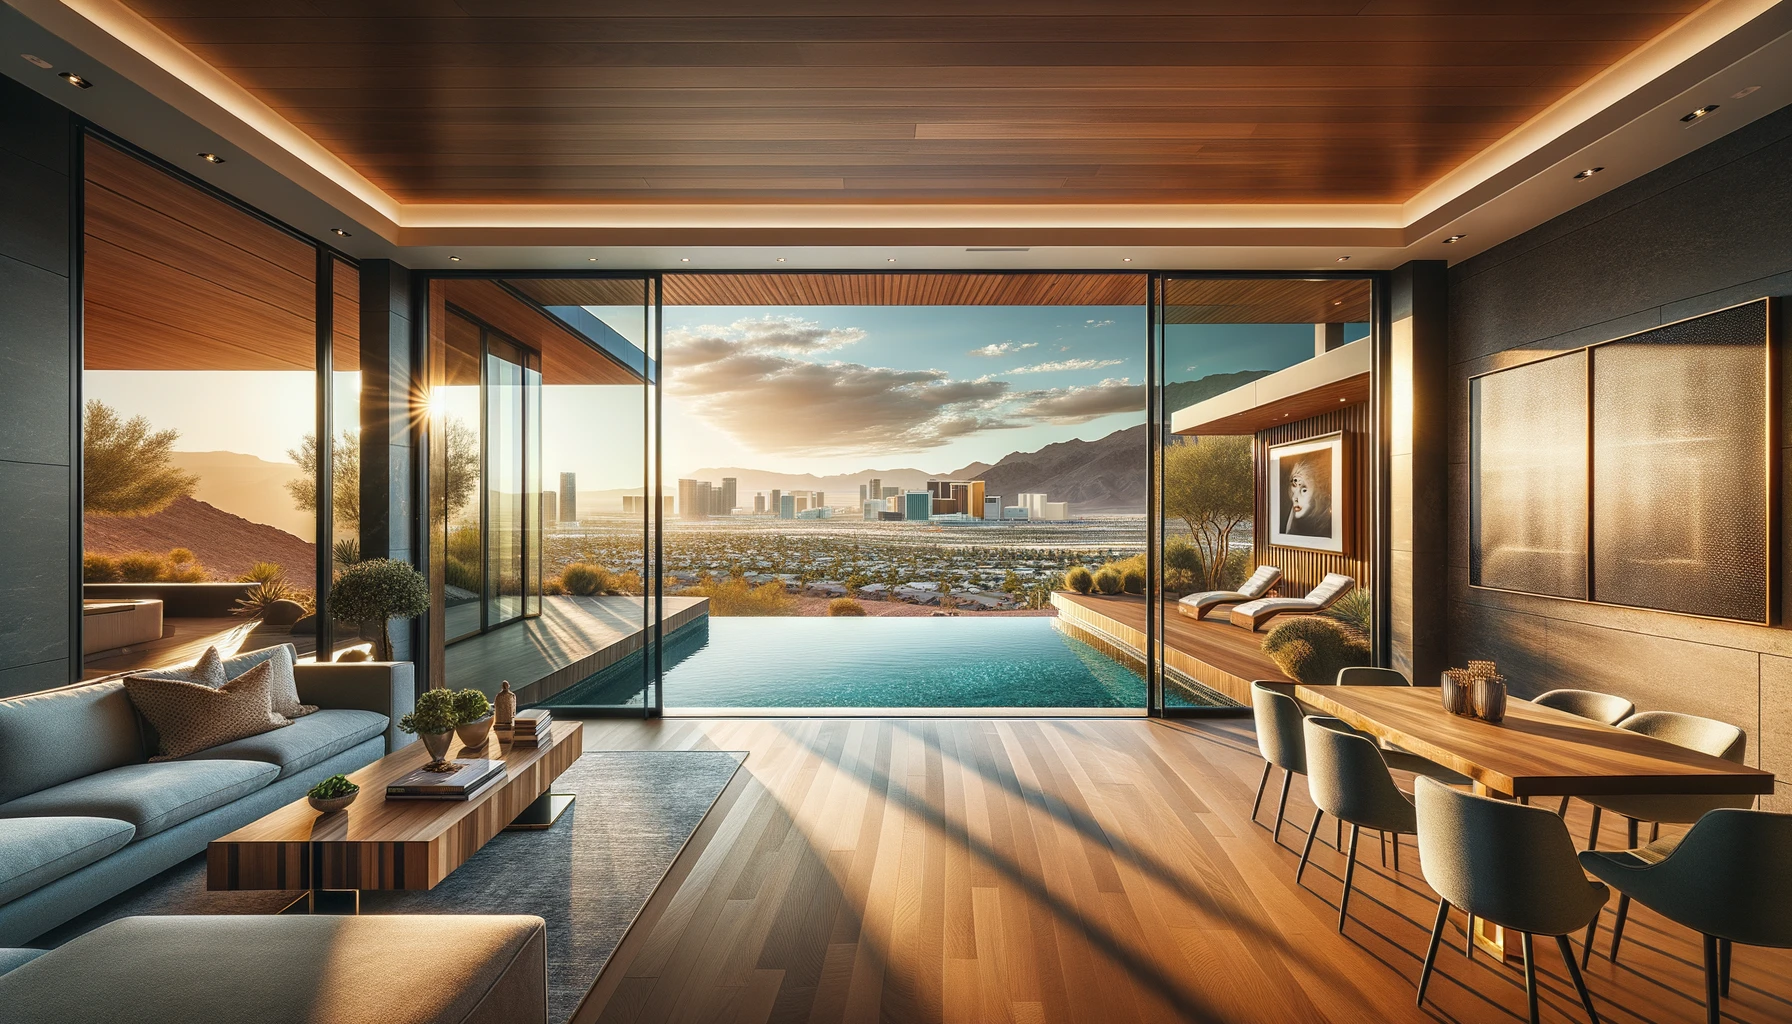 Property Laws: Las Vegas, Showcasing a Modern Las Vegas home interior with view to infinity pool.